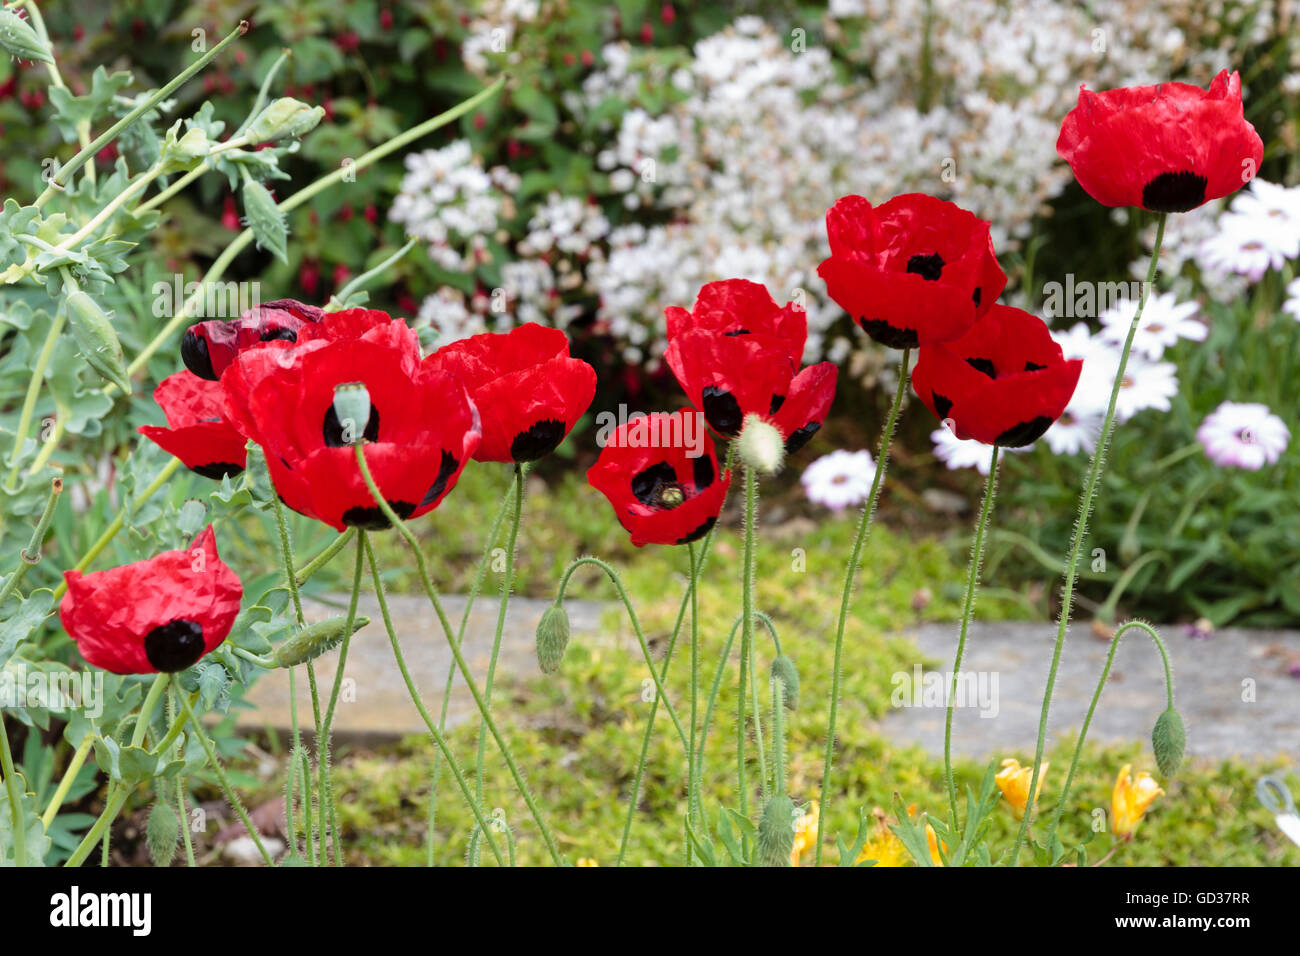 Black spotted bright red poppy flowers of the annual Papaver commutatum 'Ladybird' Stock Photo